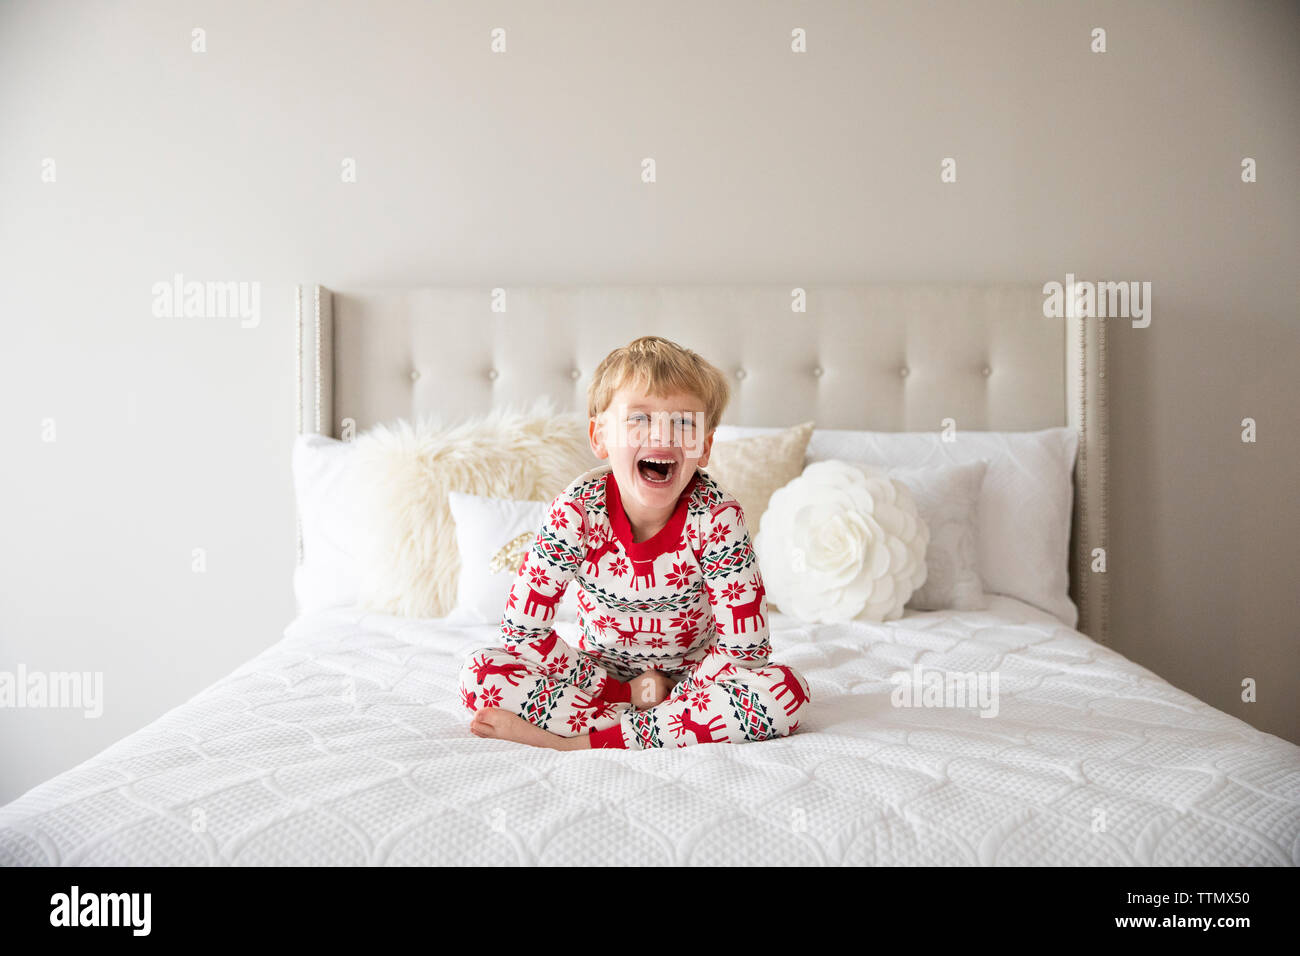 Cute Blonde Boy Wearing Holiday Pajamas Laughs While Sitting on Bed Stock Photo